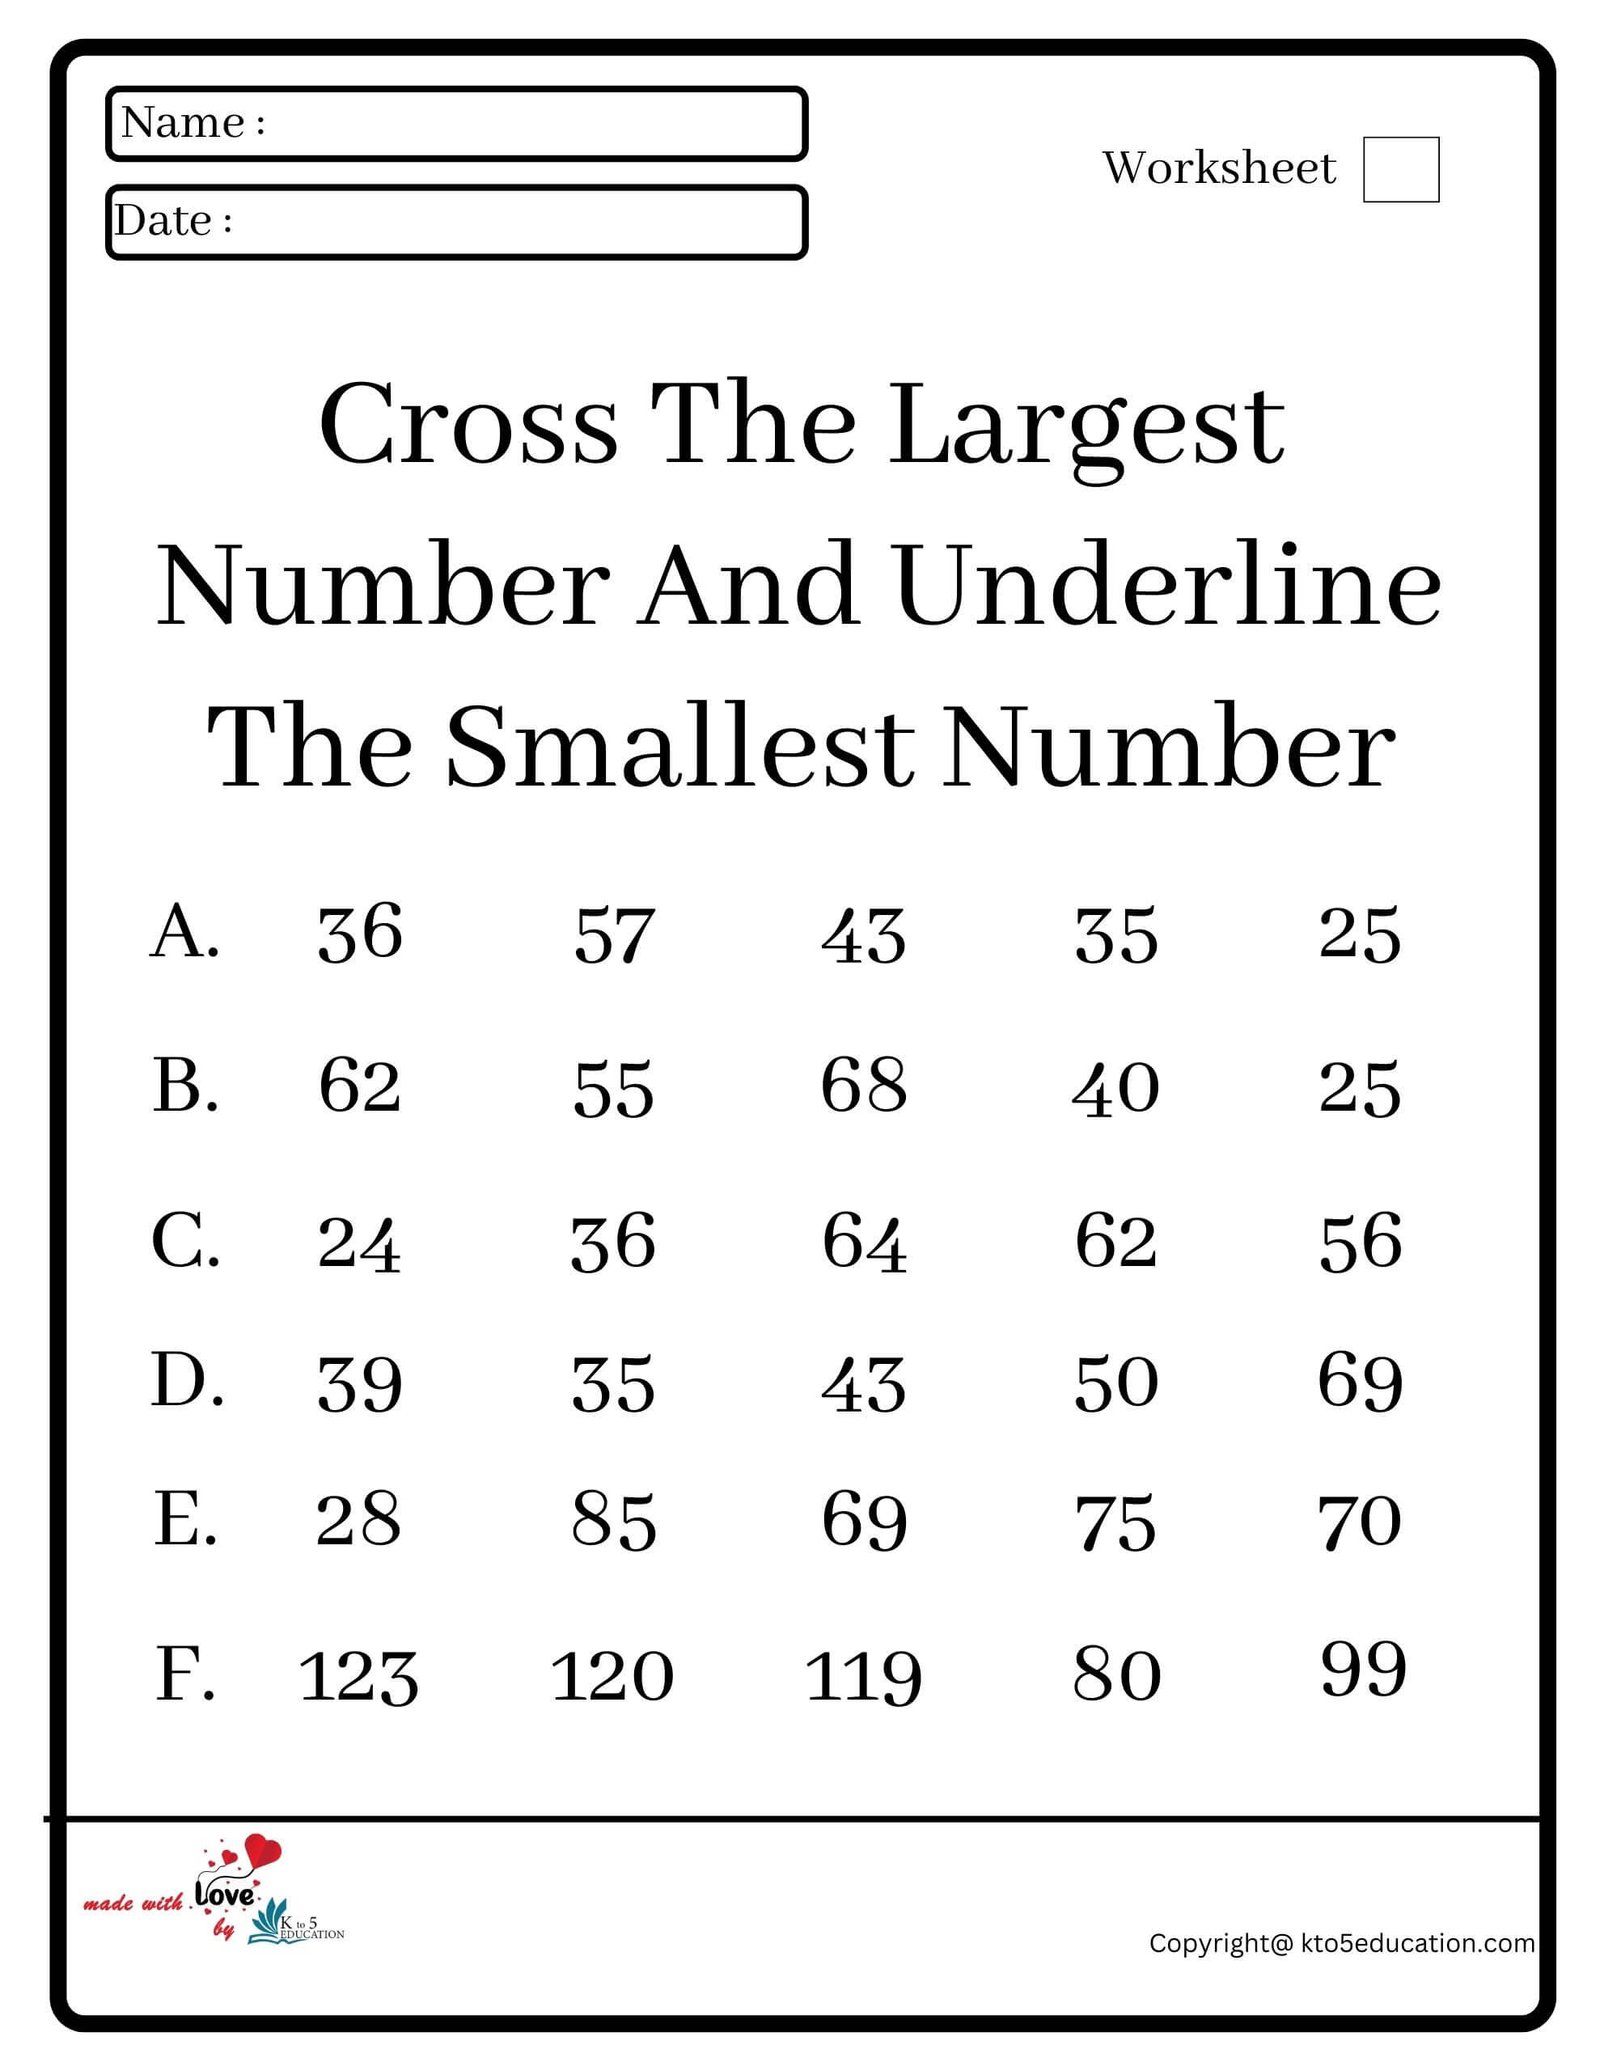 Cross The Largest Number And Underline The Smallest Number Worksheet